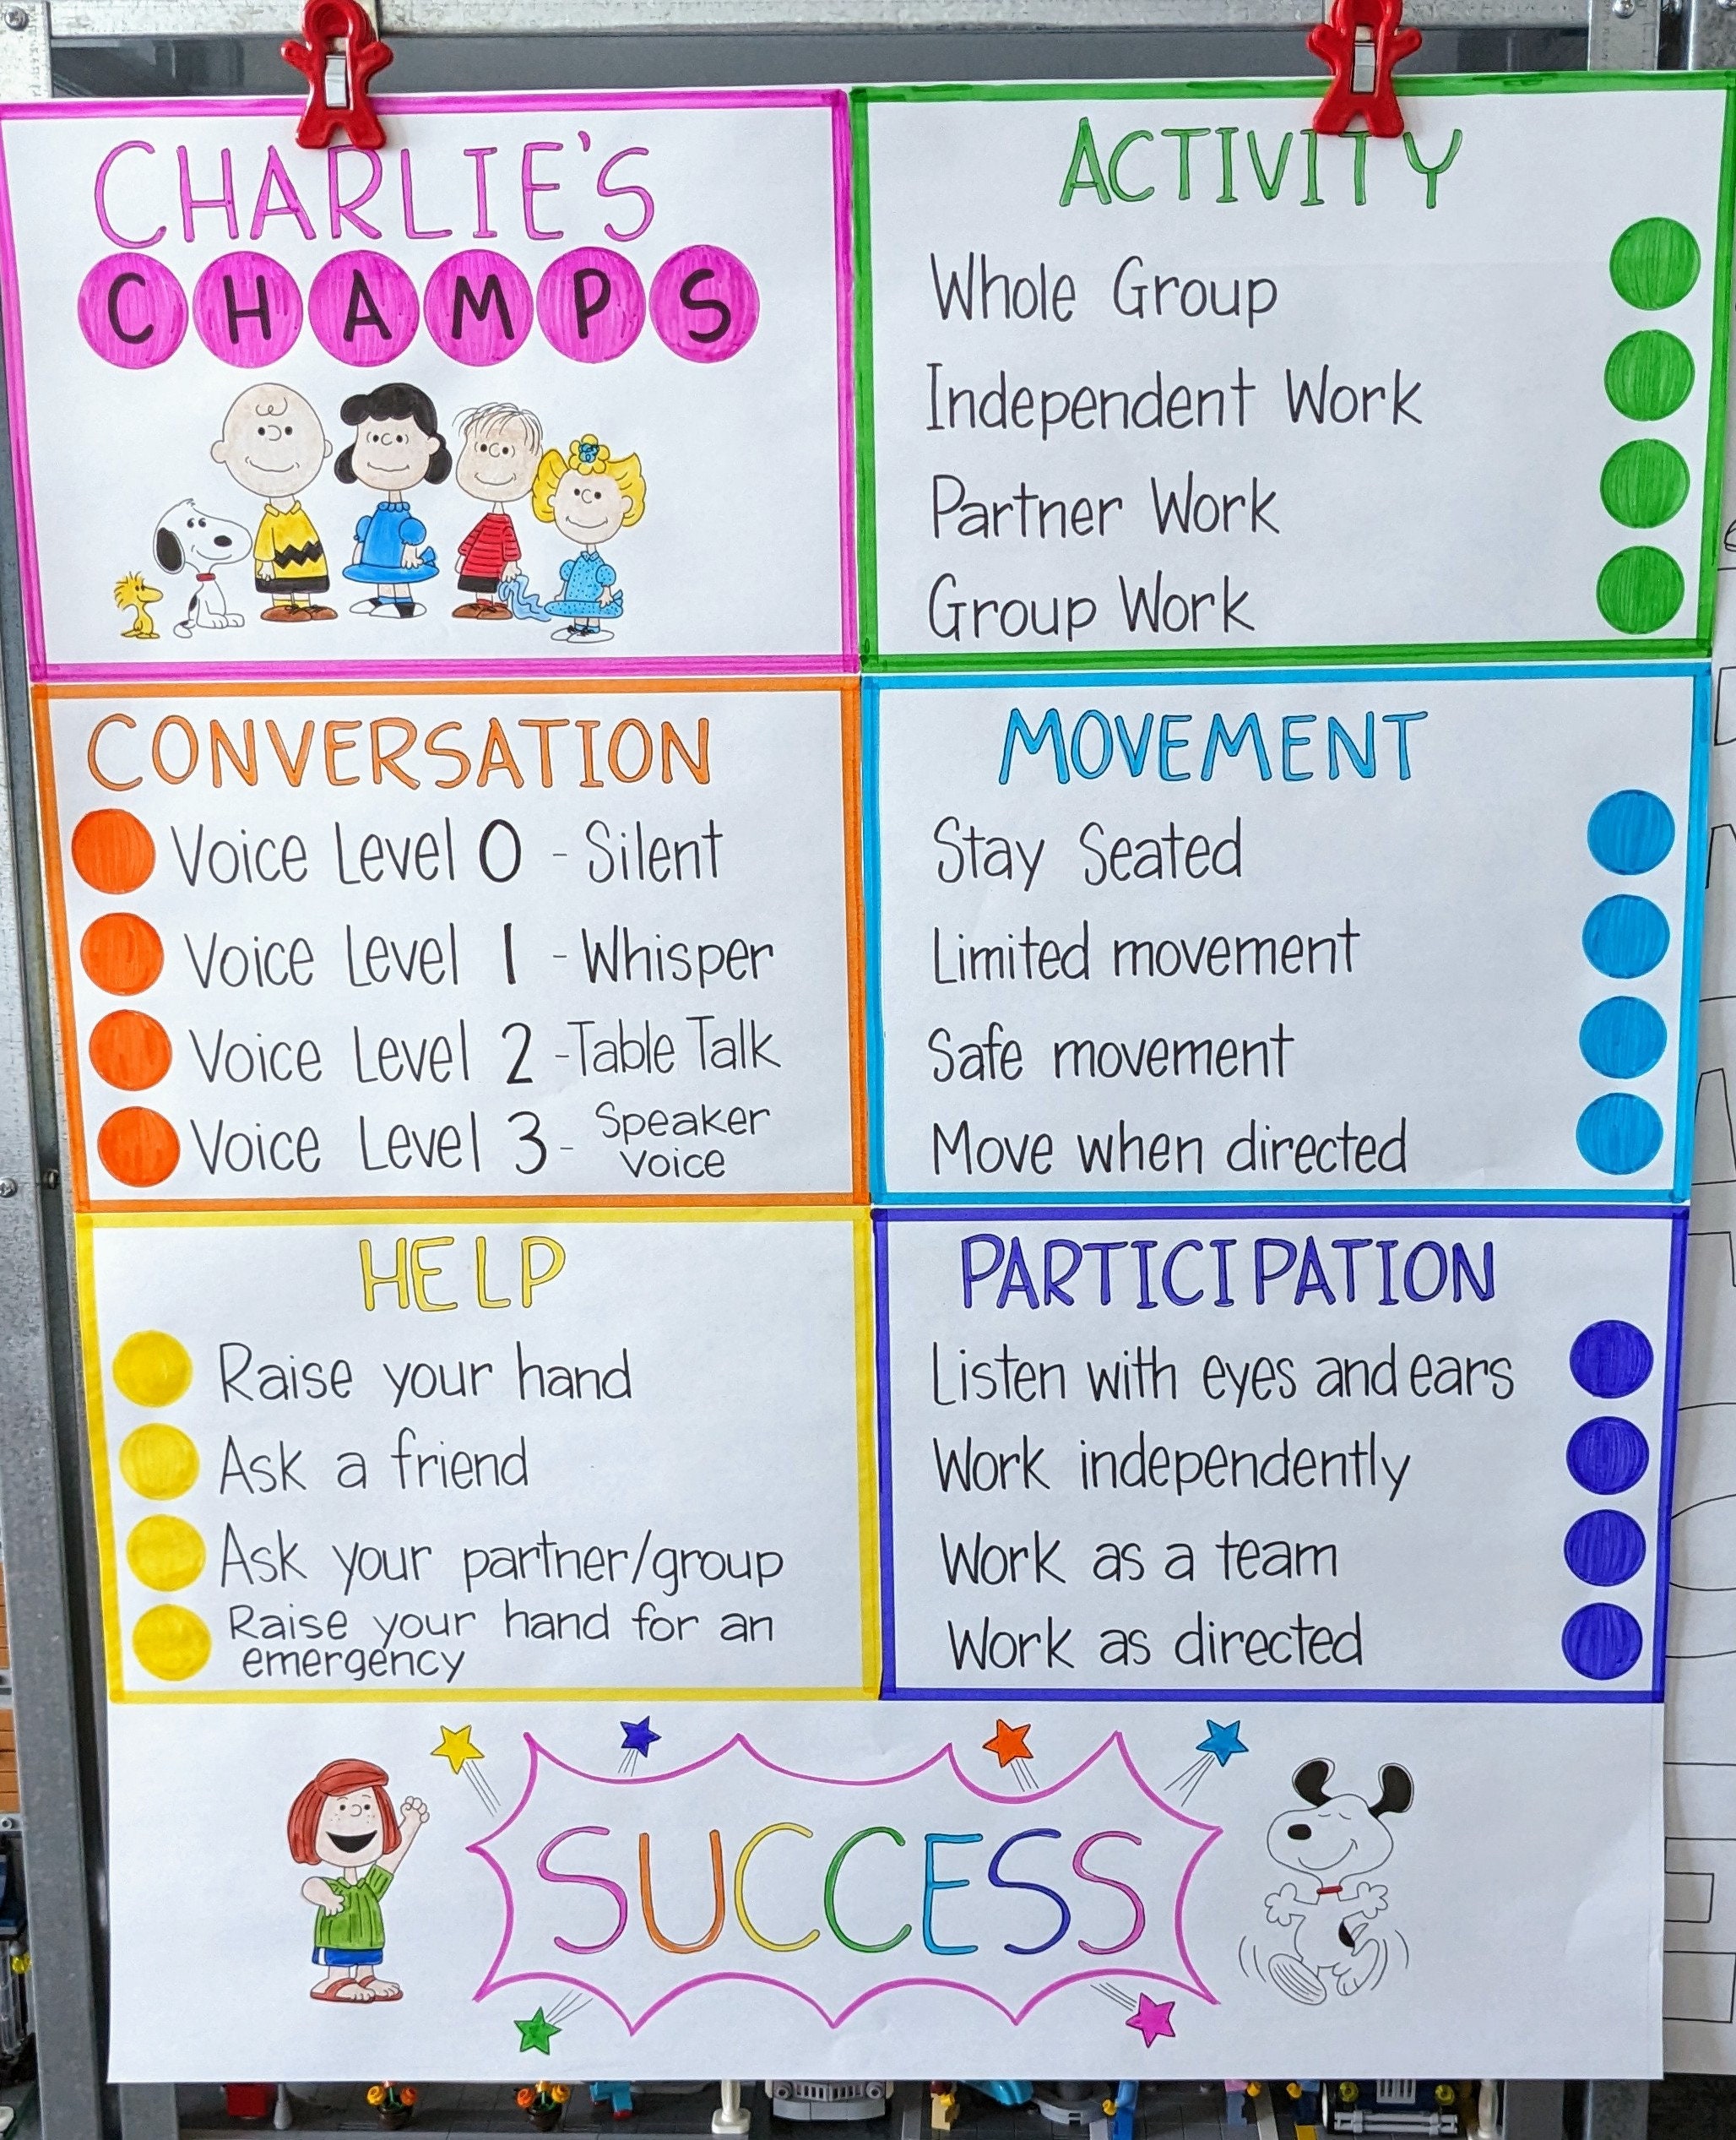 LAMINATED- I’m done, now what? Anchor Chart